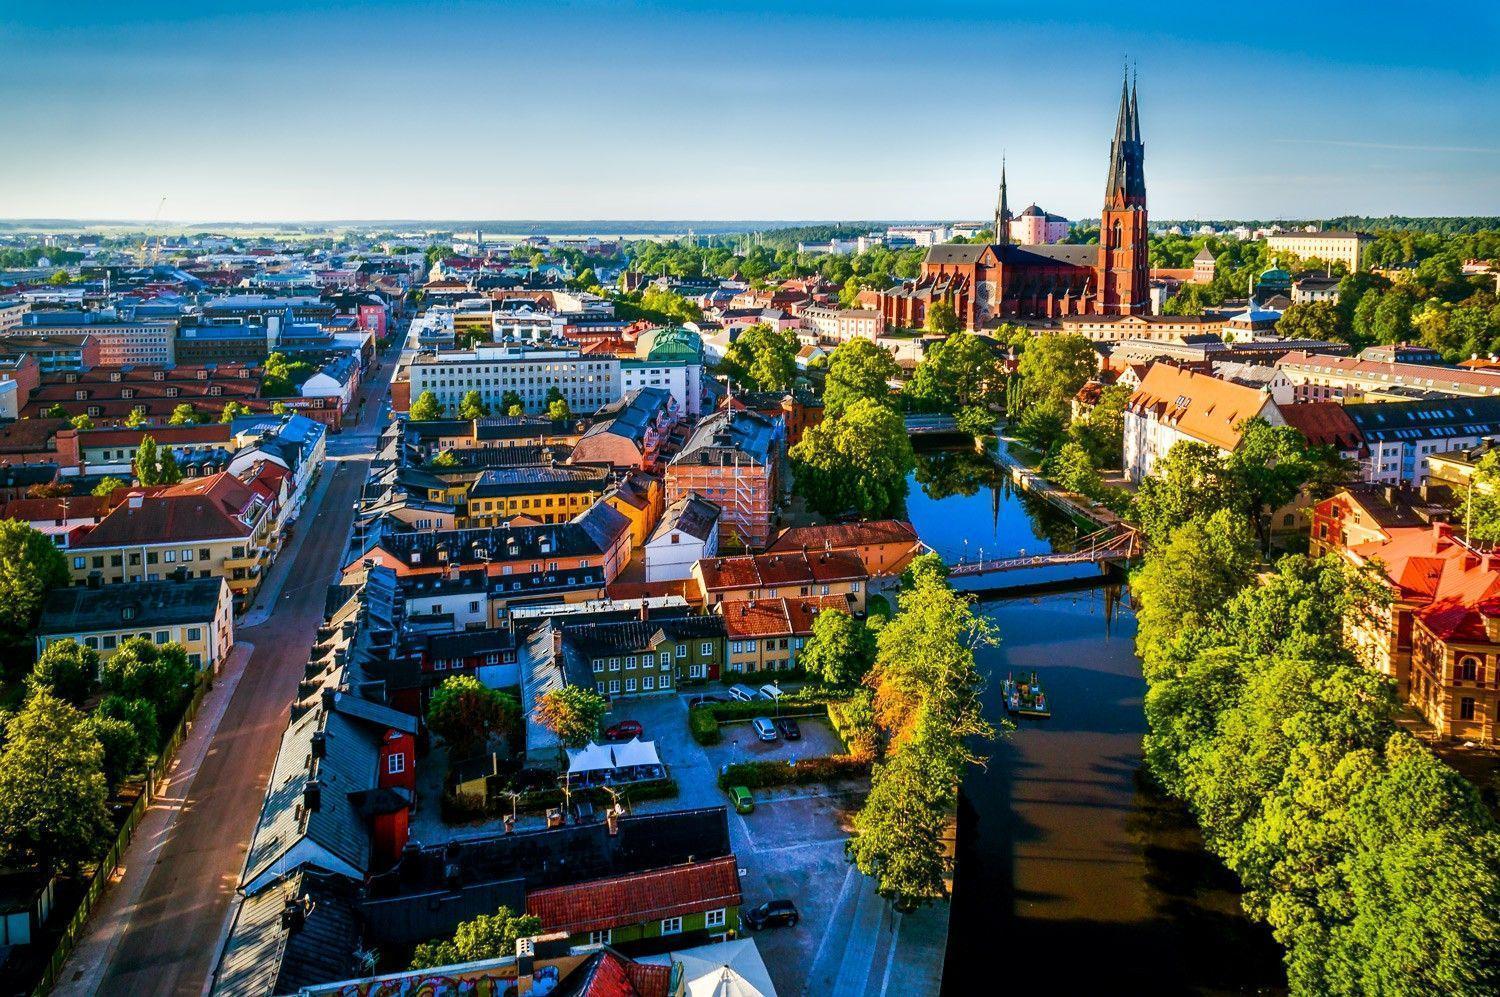 Welcome To Sweden Wallpapers